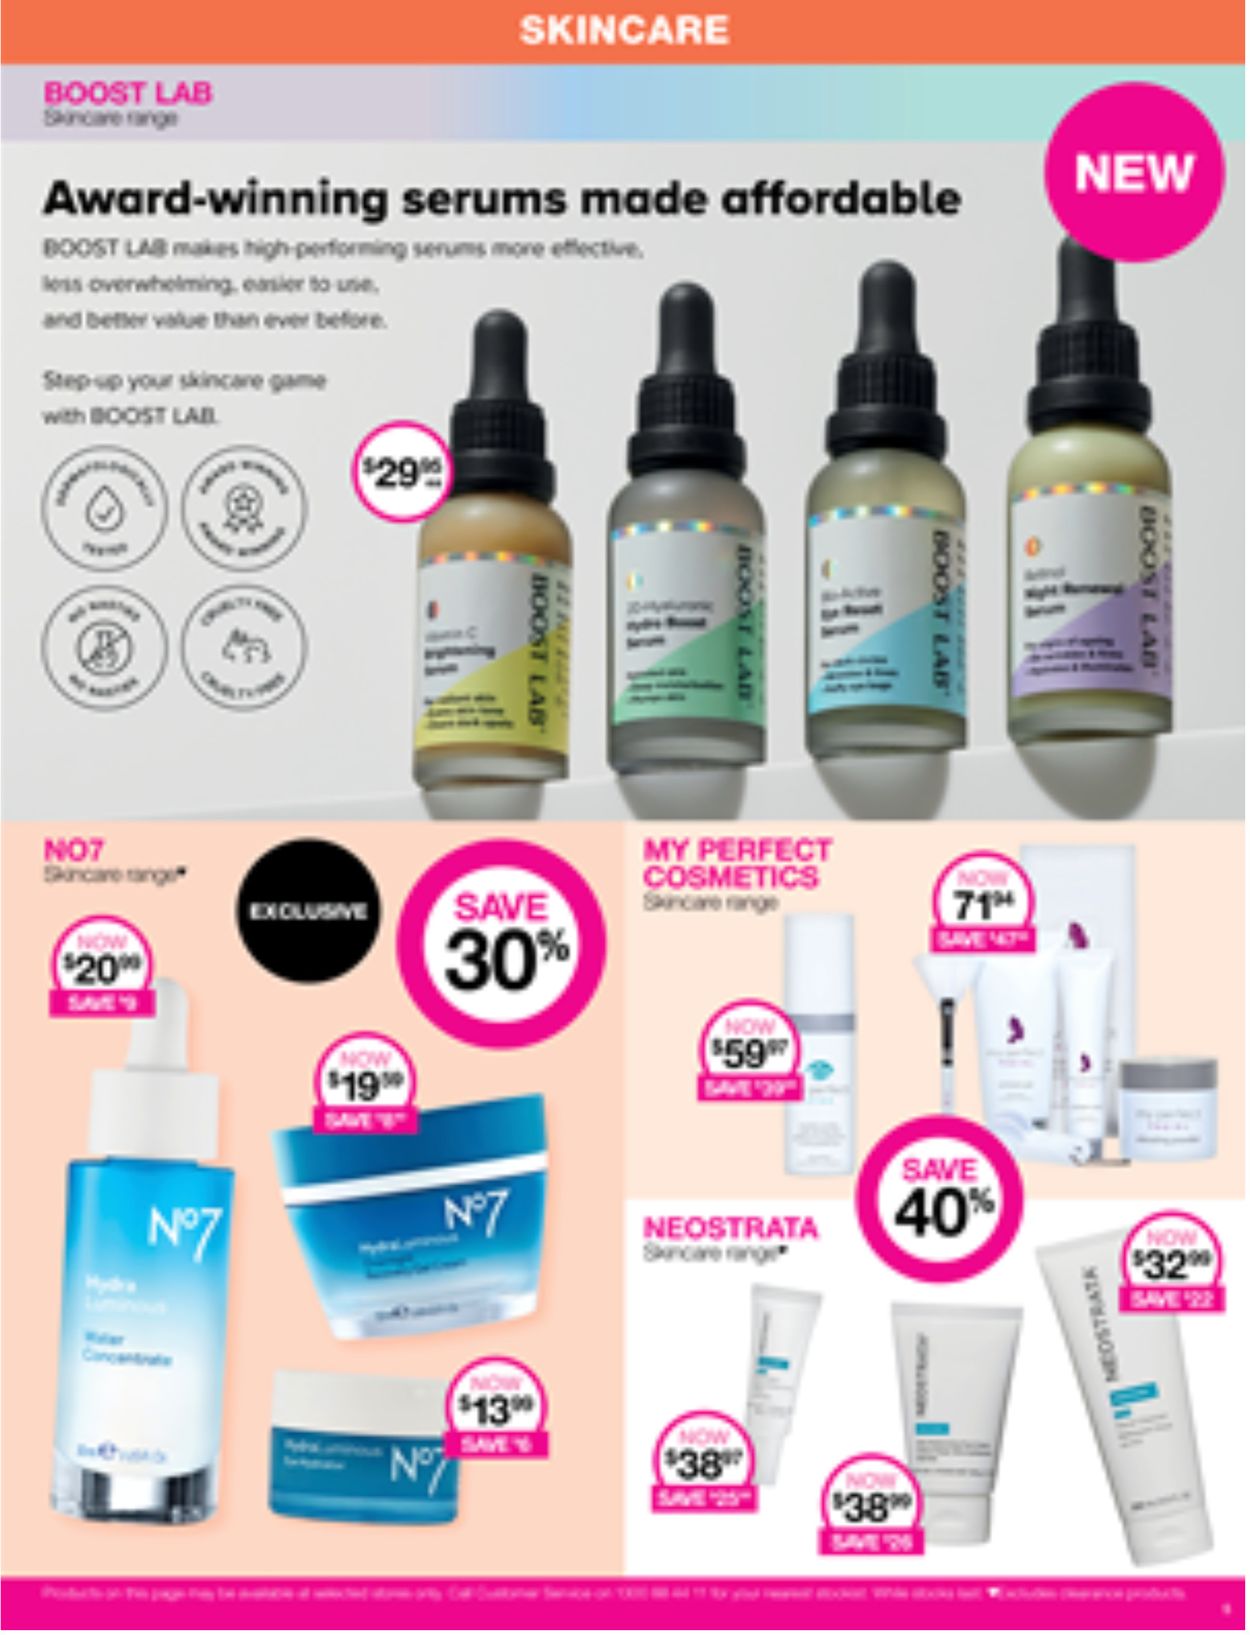 Priceline Pharmacy Catalogue from 01/07/2022